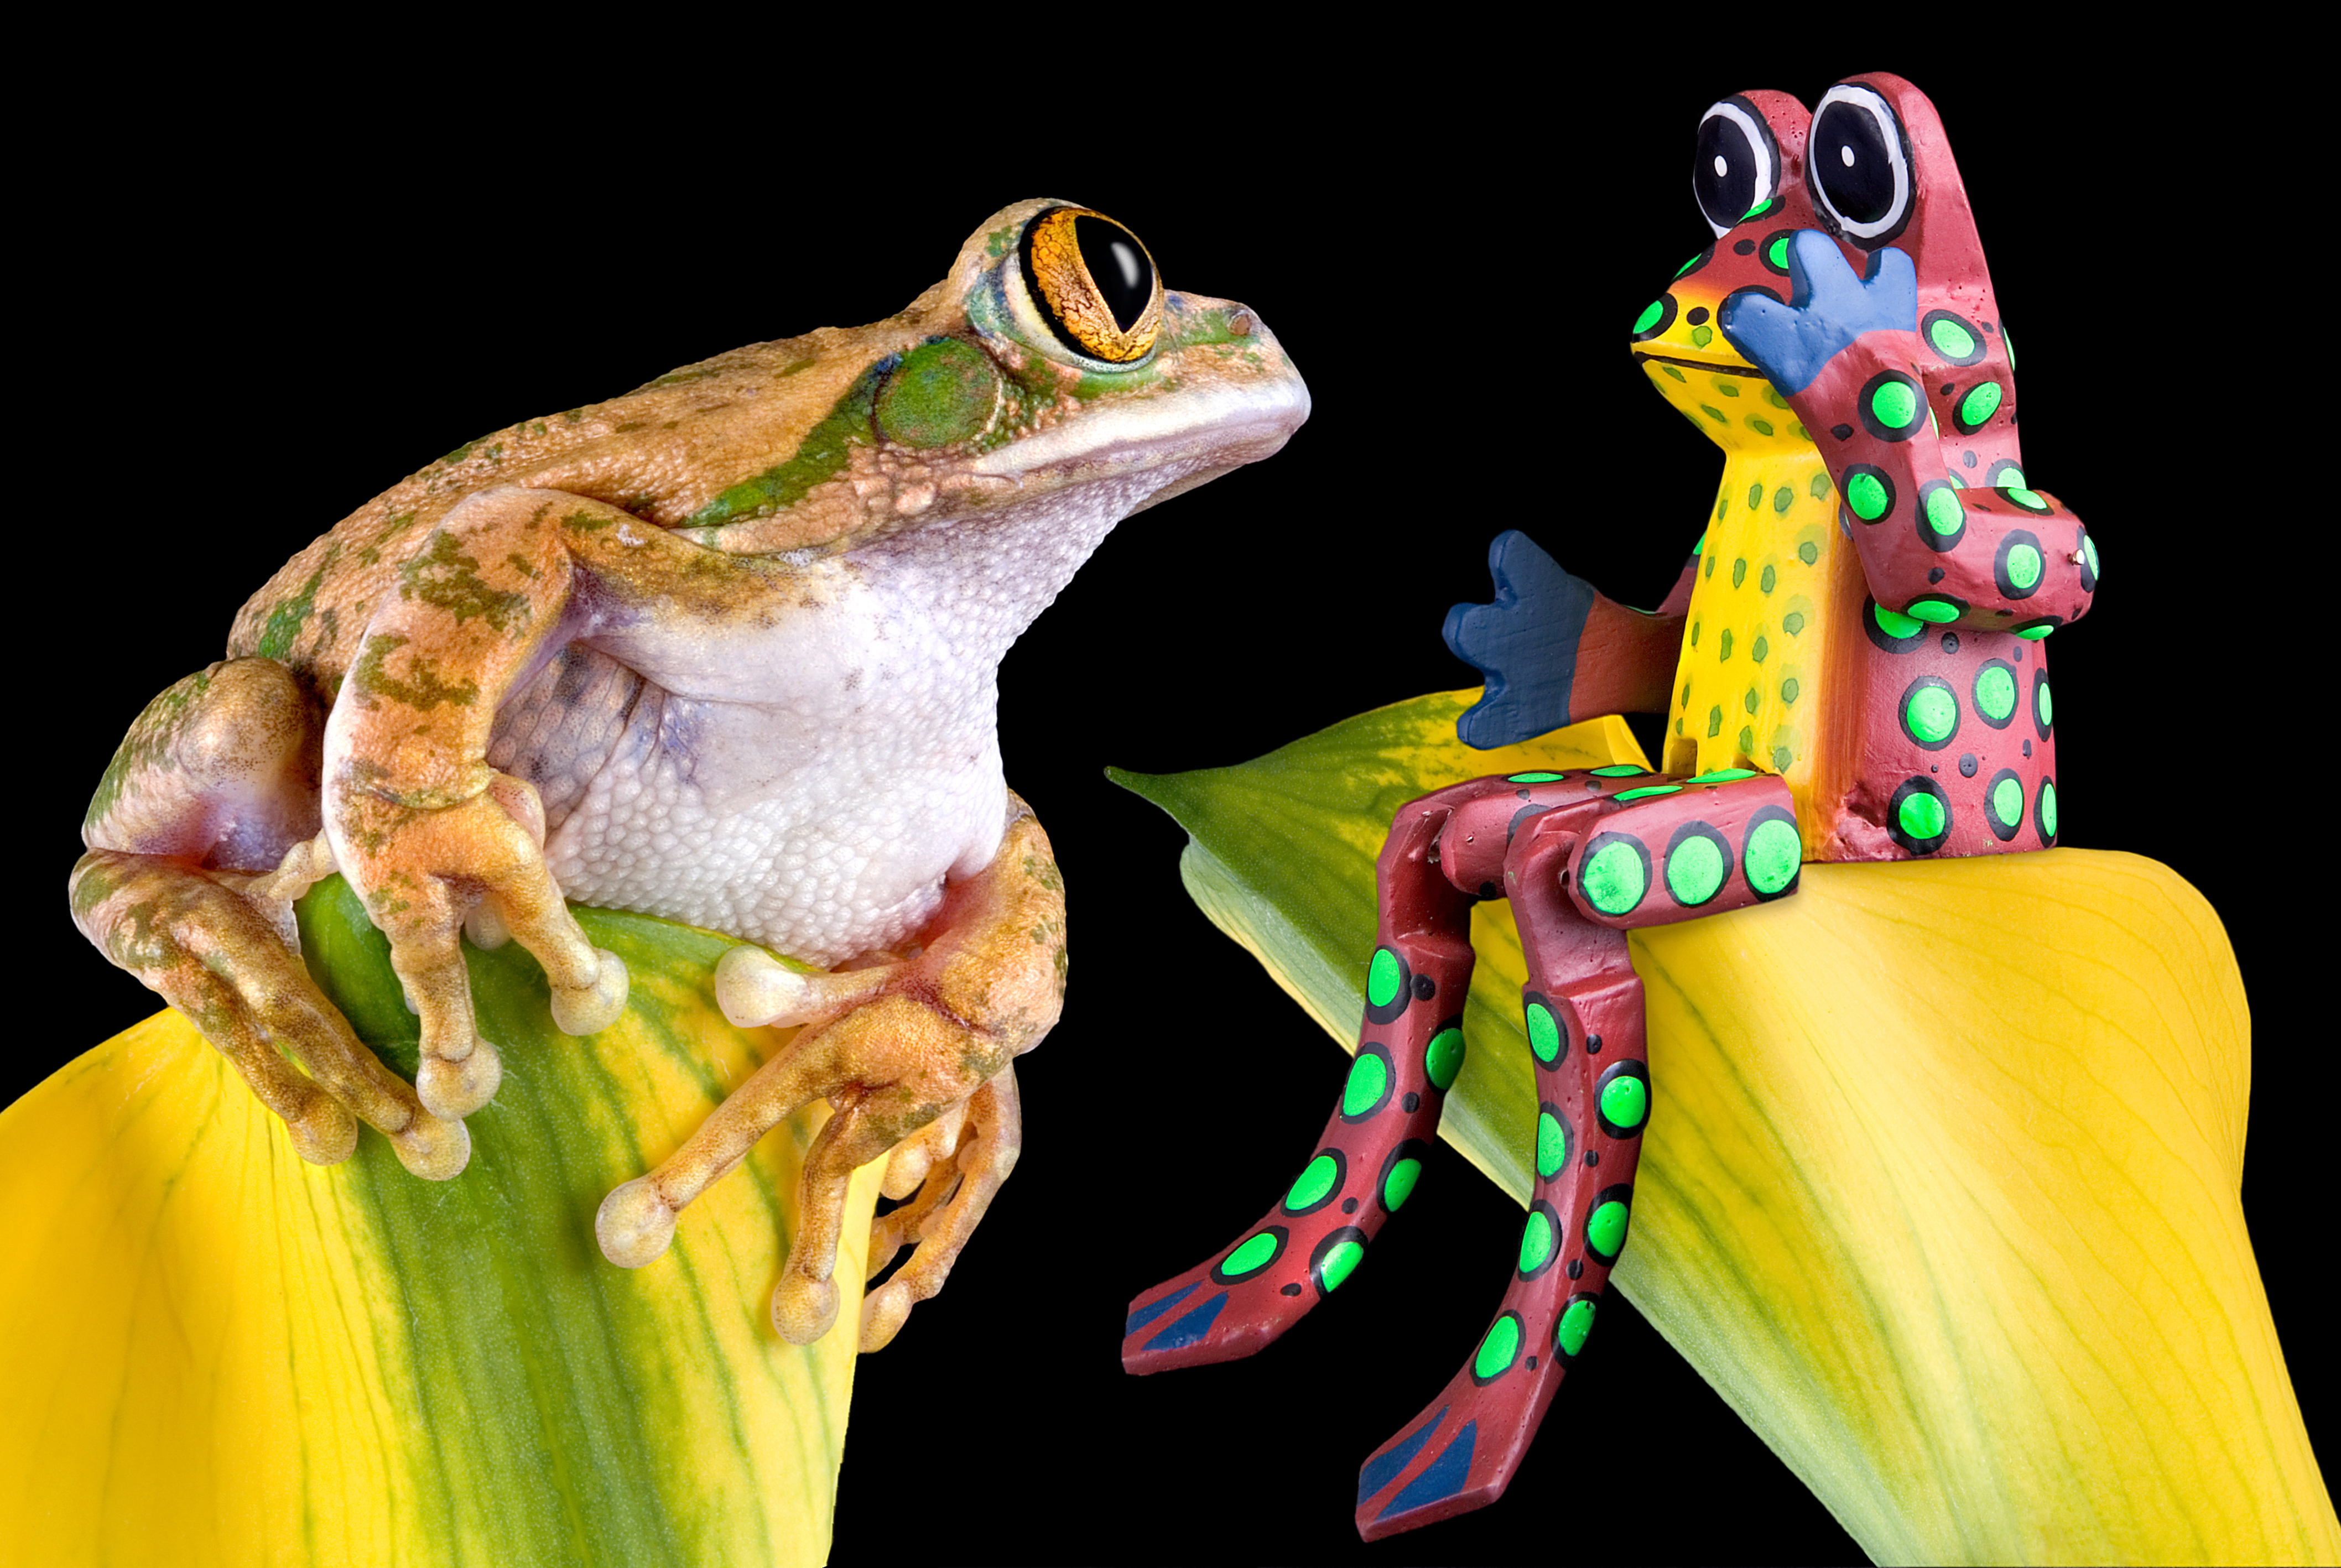 Download PC Wallpaper animal, frog, amphibian, toy, frogs